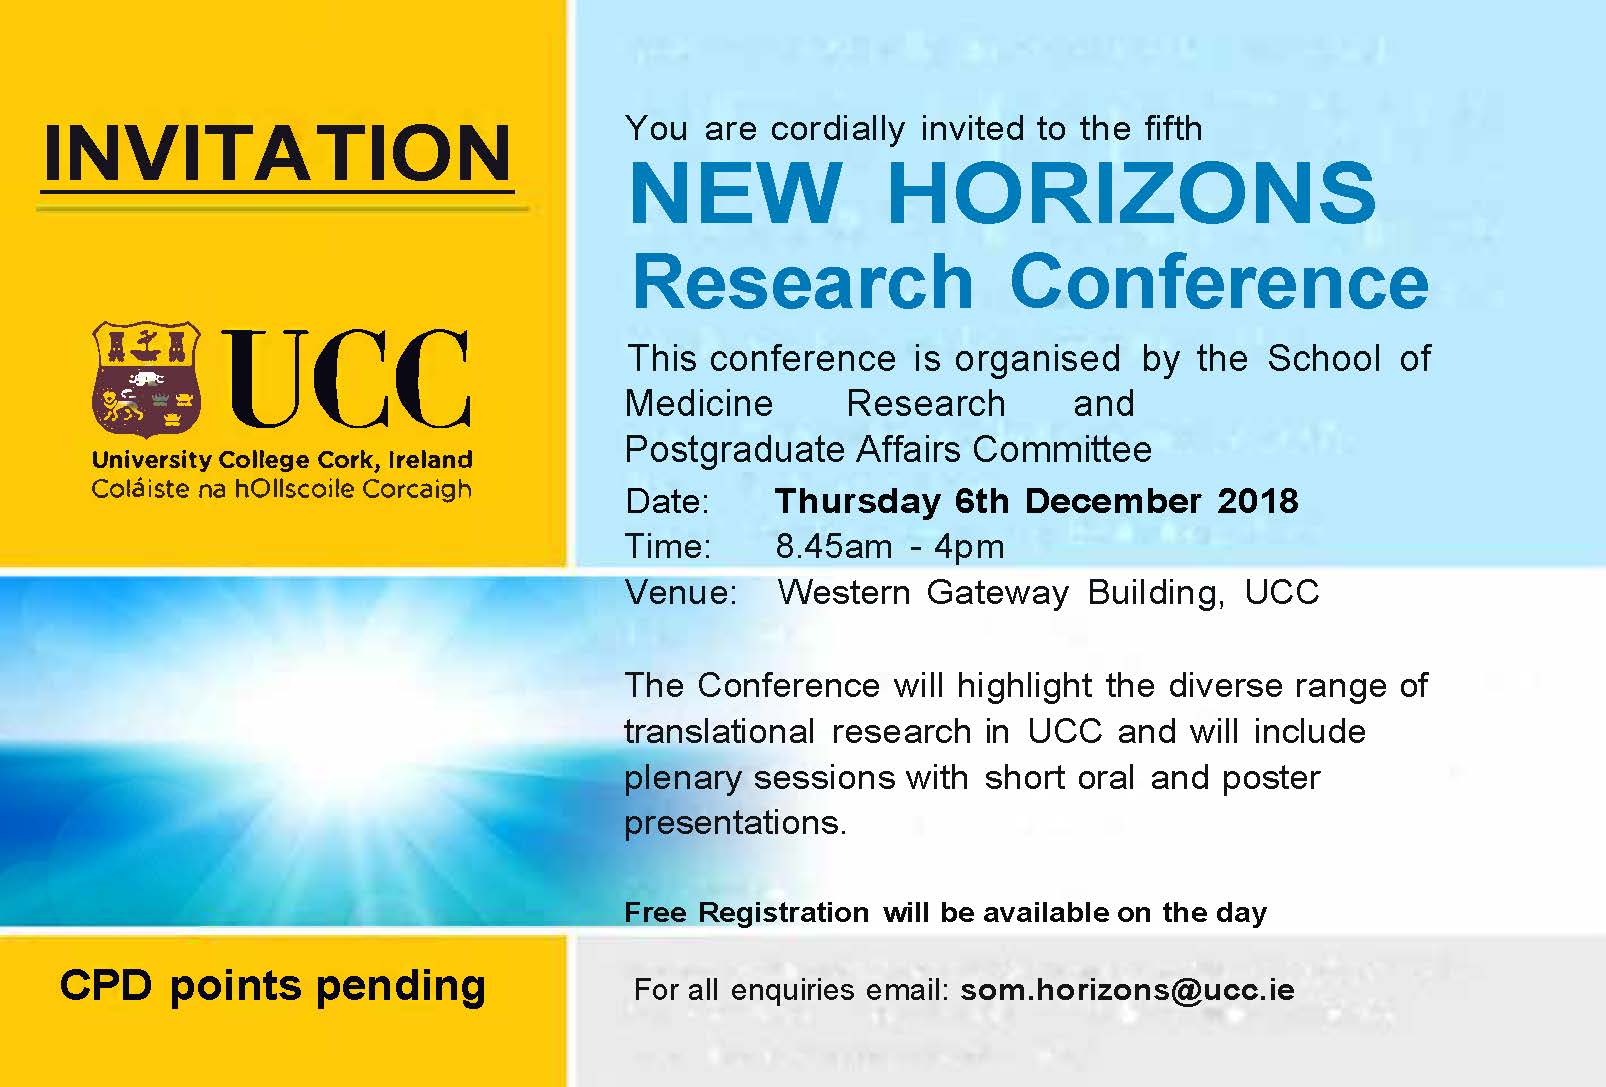 New Horizons Research Conference 2018